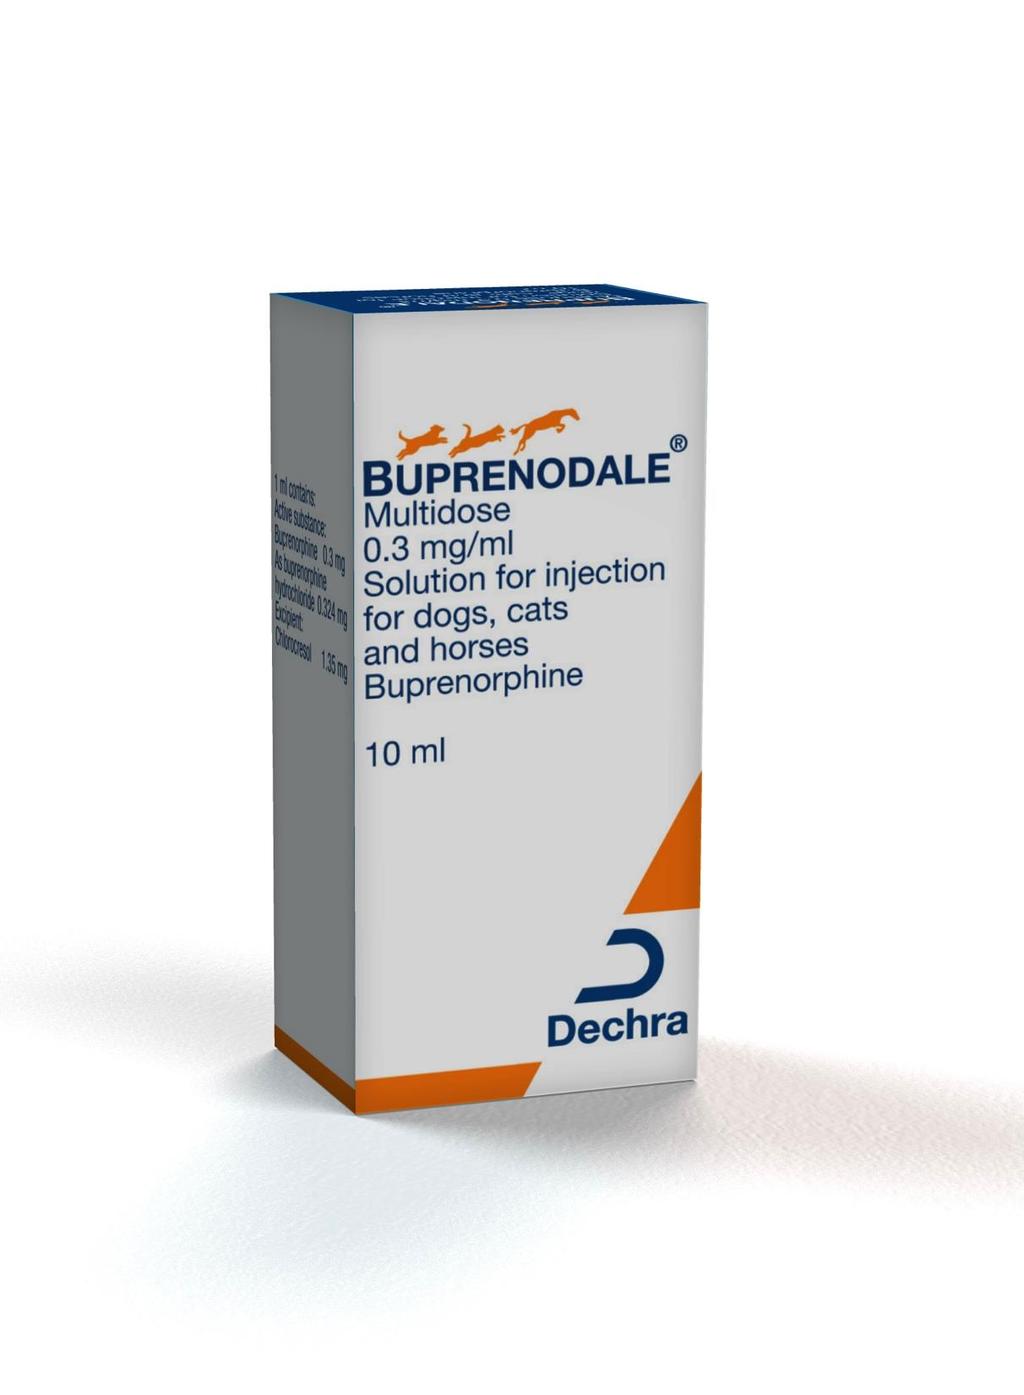 buprenorphine and is